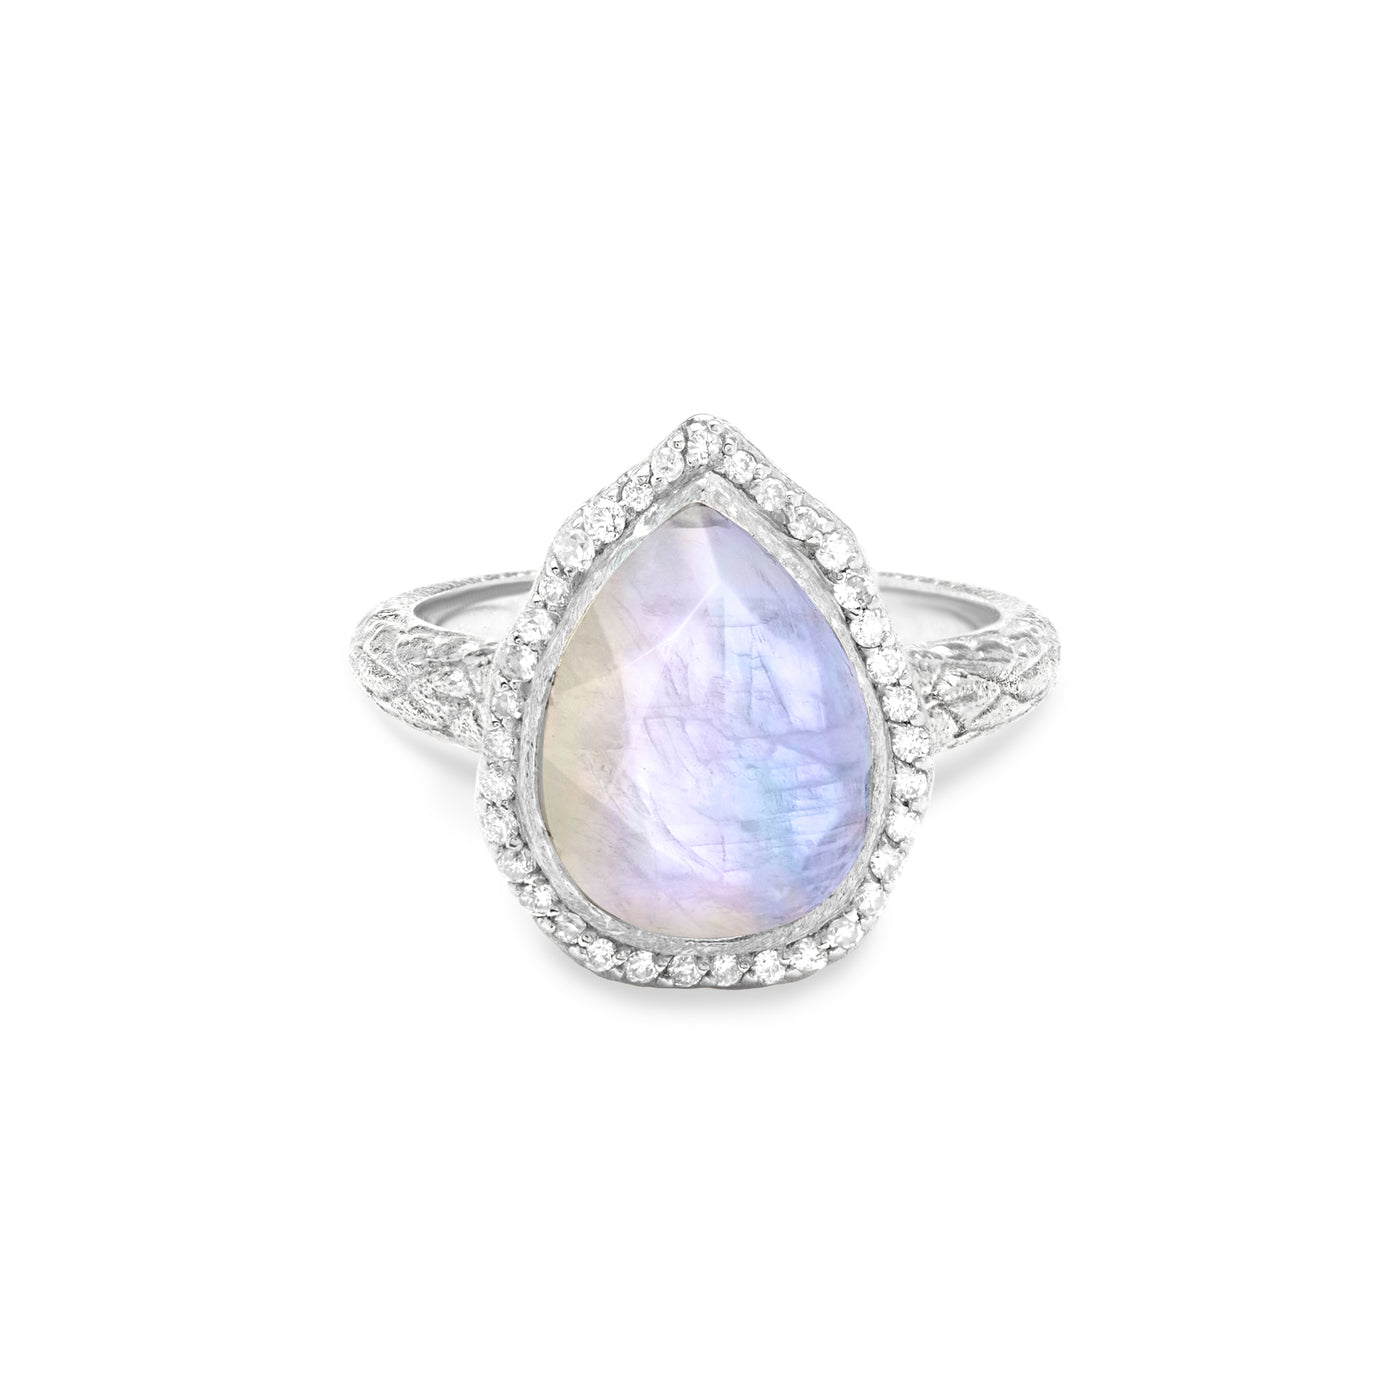 14 Karat White Gold Ring with Pear Shaped Moonstone Stone with Halo of White Diamonds Against White Background